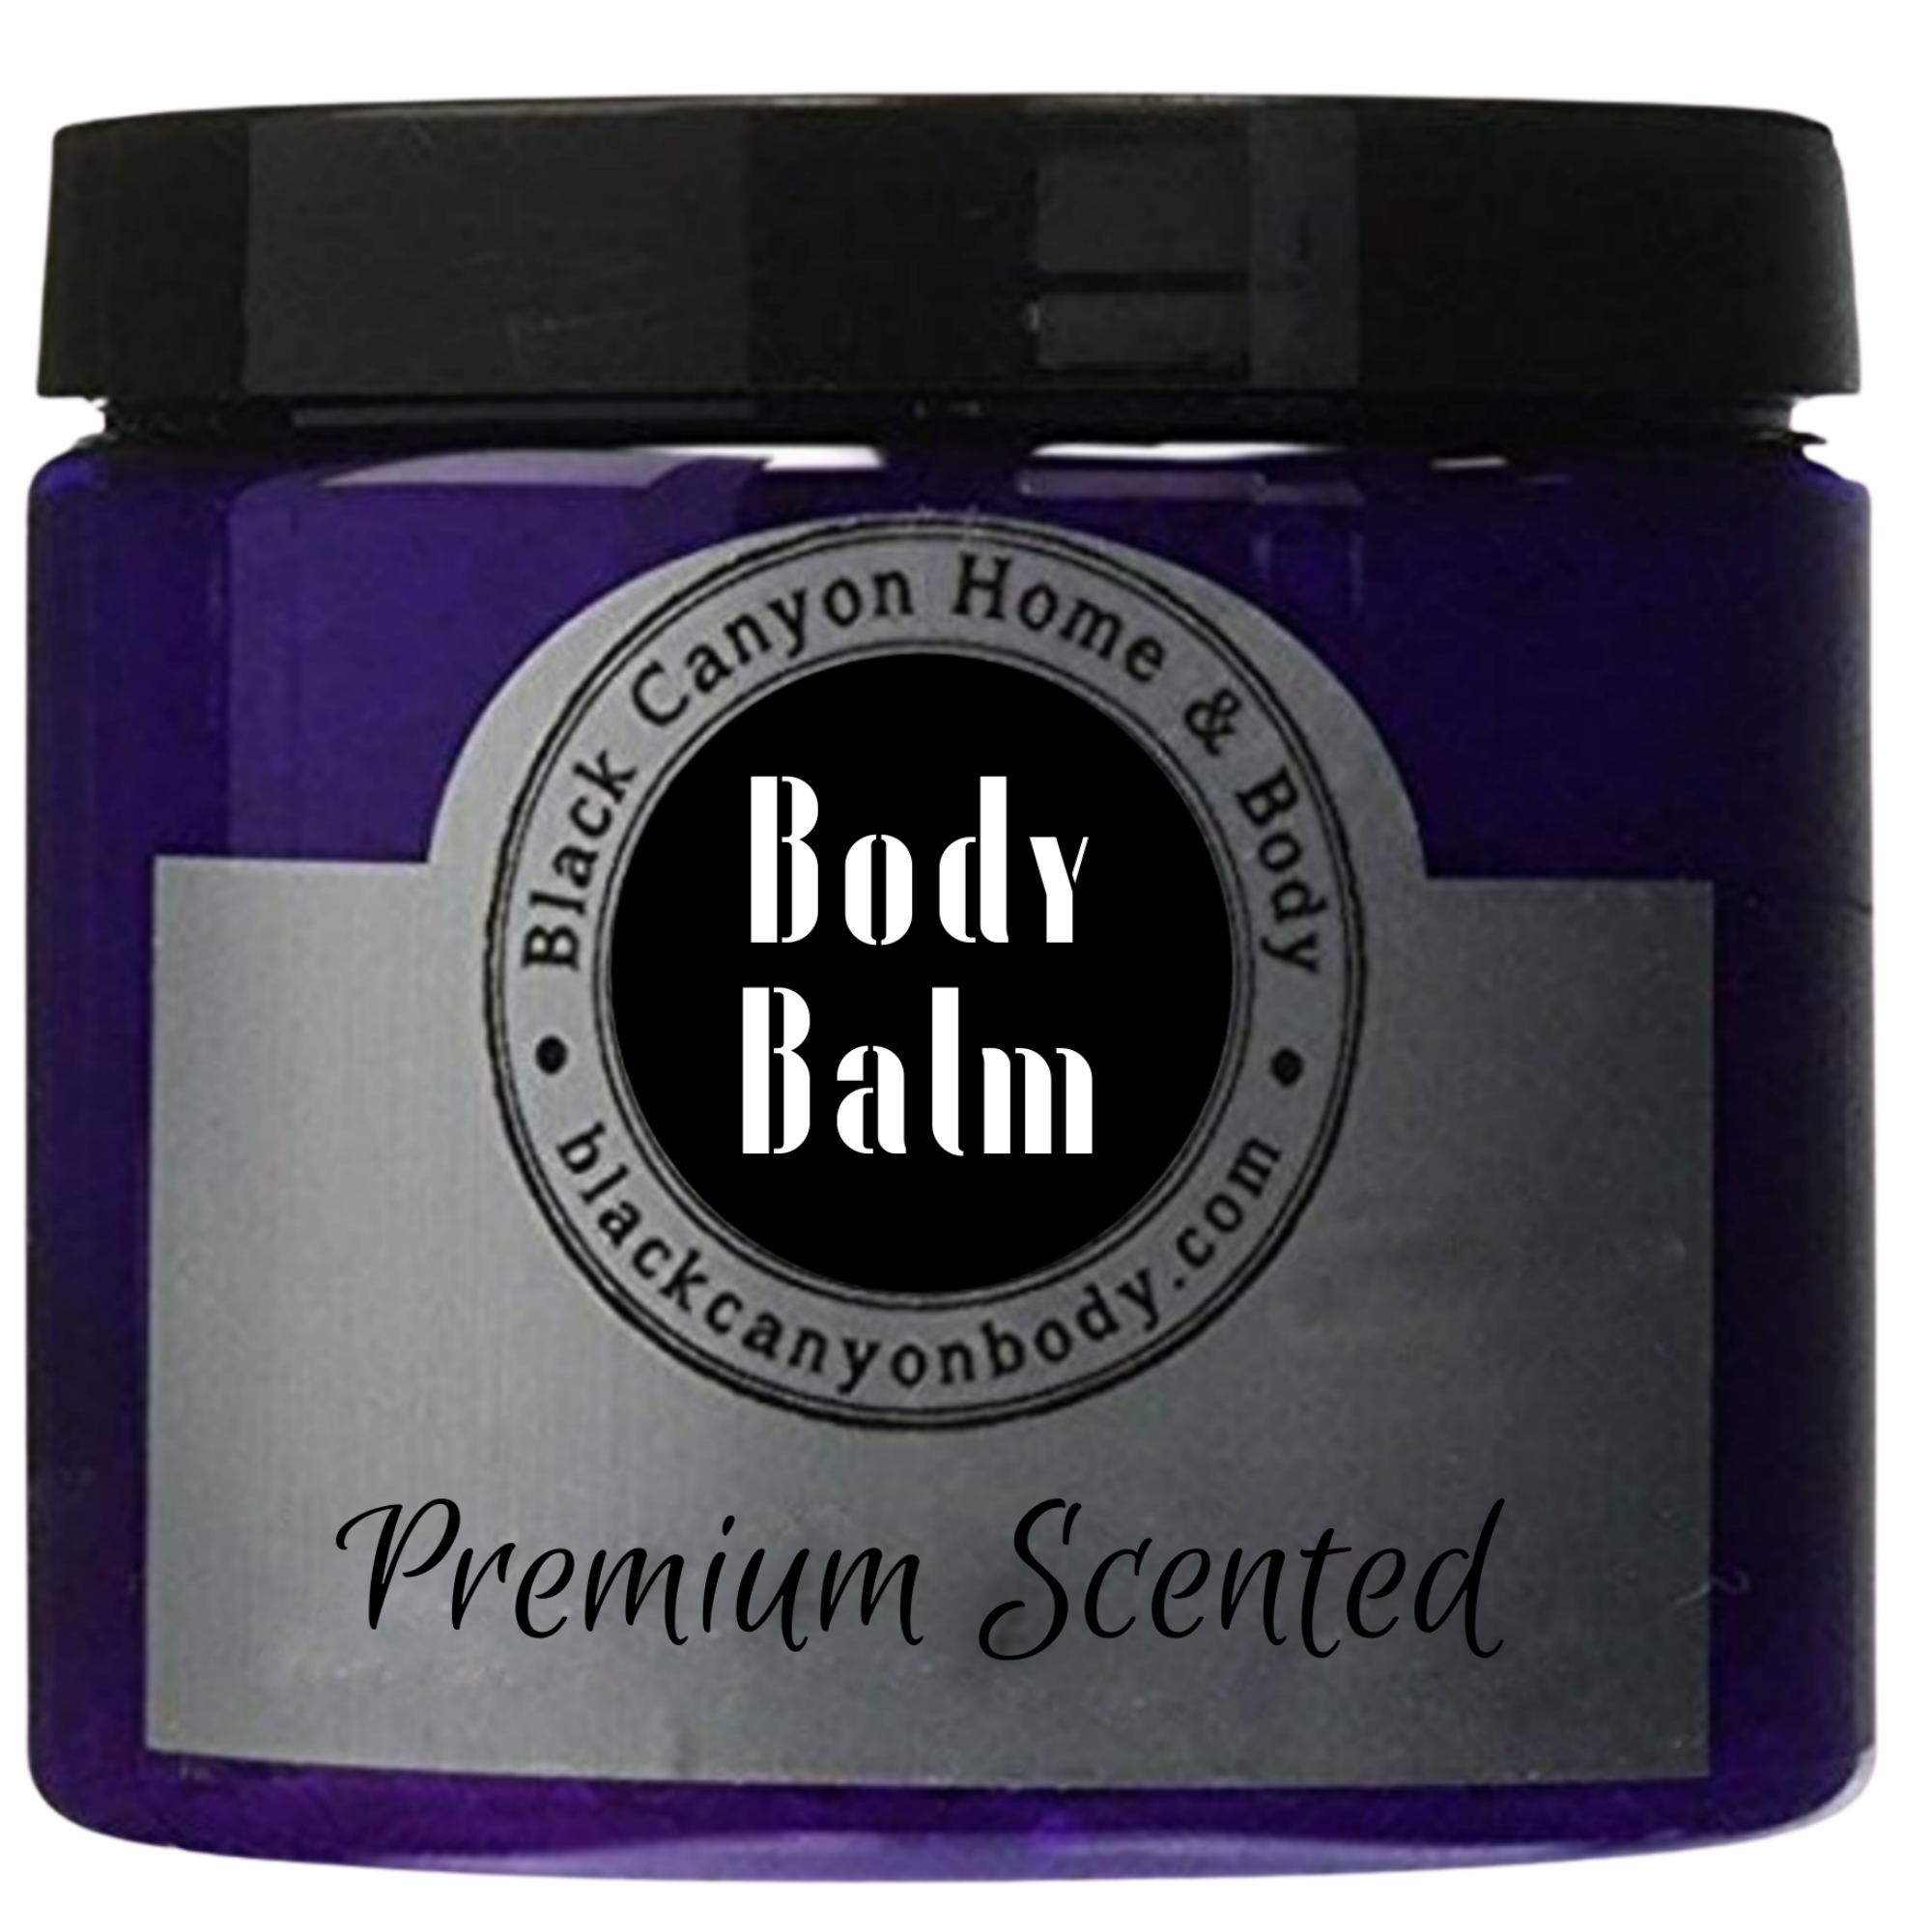 Black Canyon Easter Jelly Bean Scented Natural Body Balm with Shea